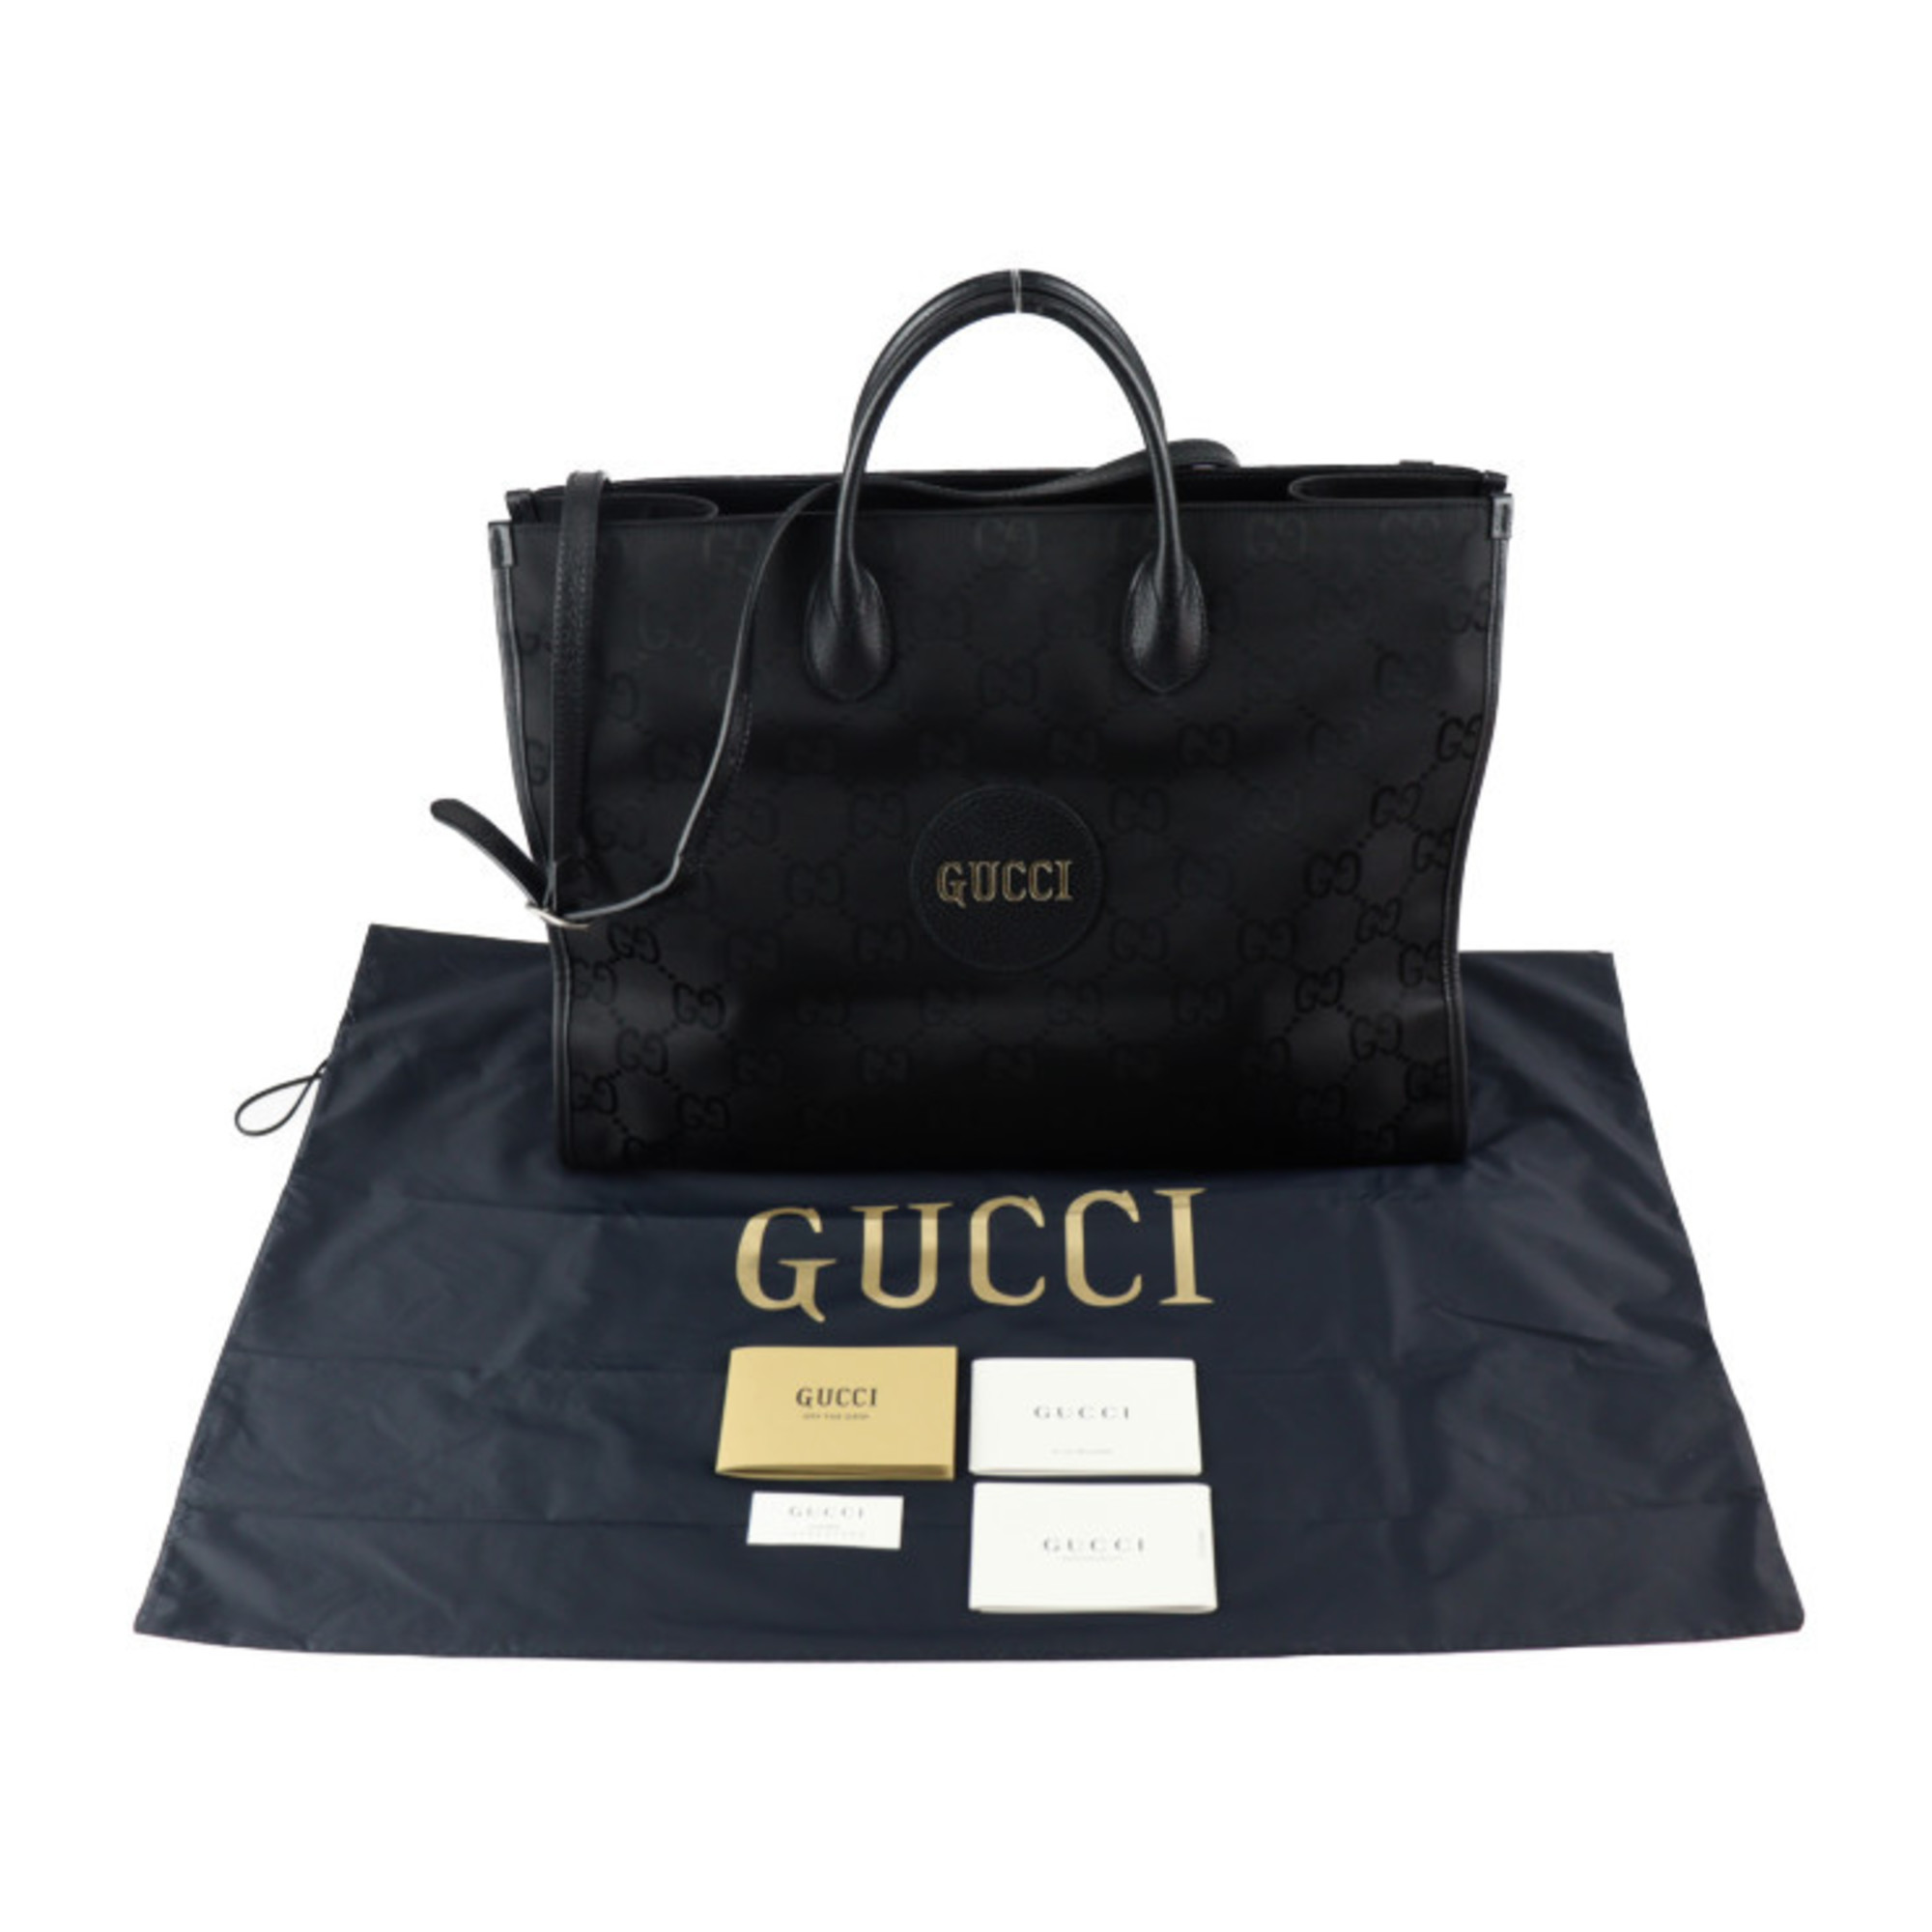 GUCCI Off The Grid Tote Bag 630353 GG Nylon x Leather Black 2WAY Shoulder